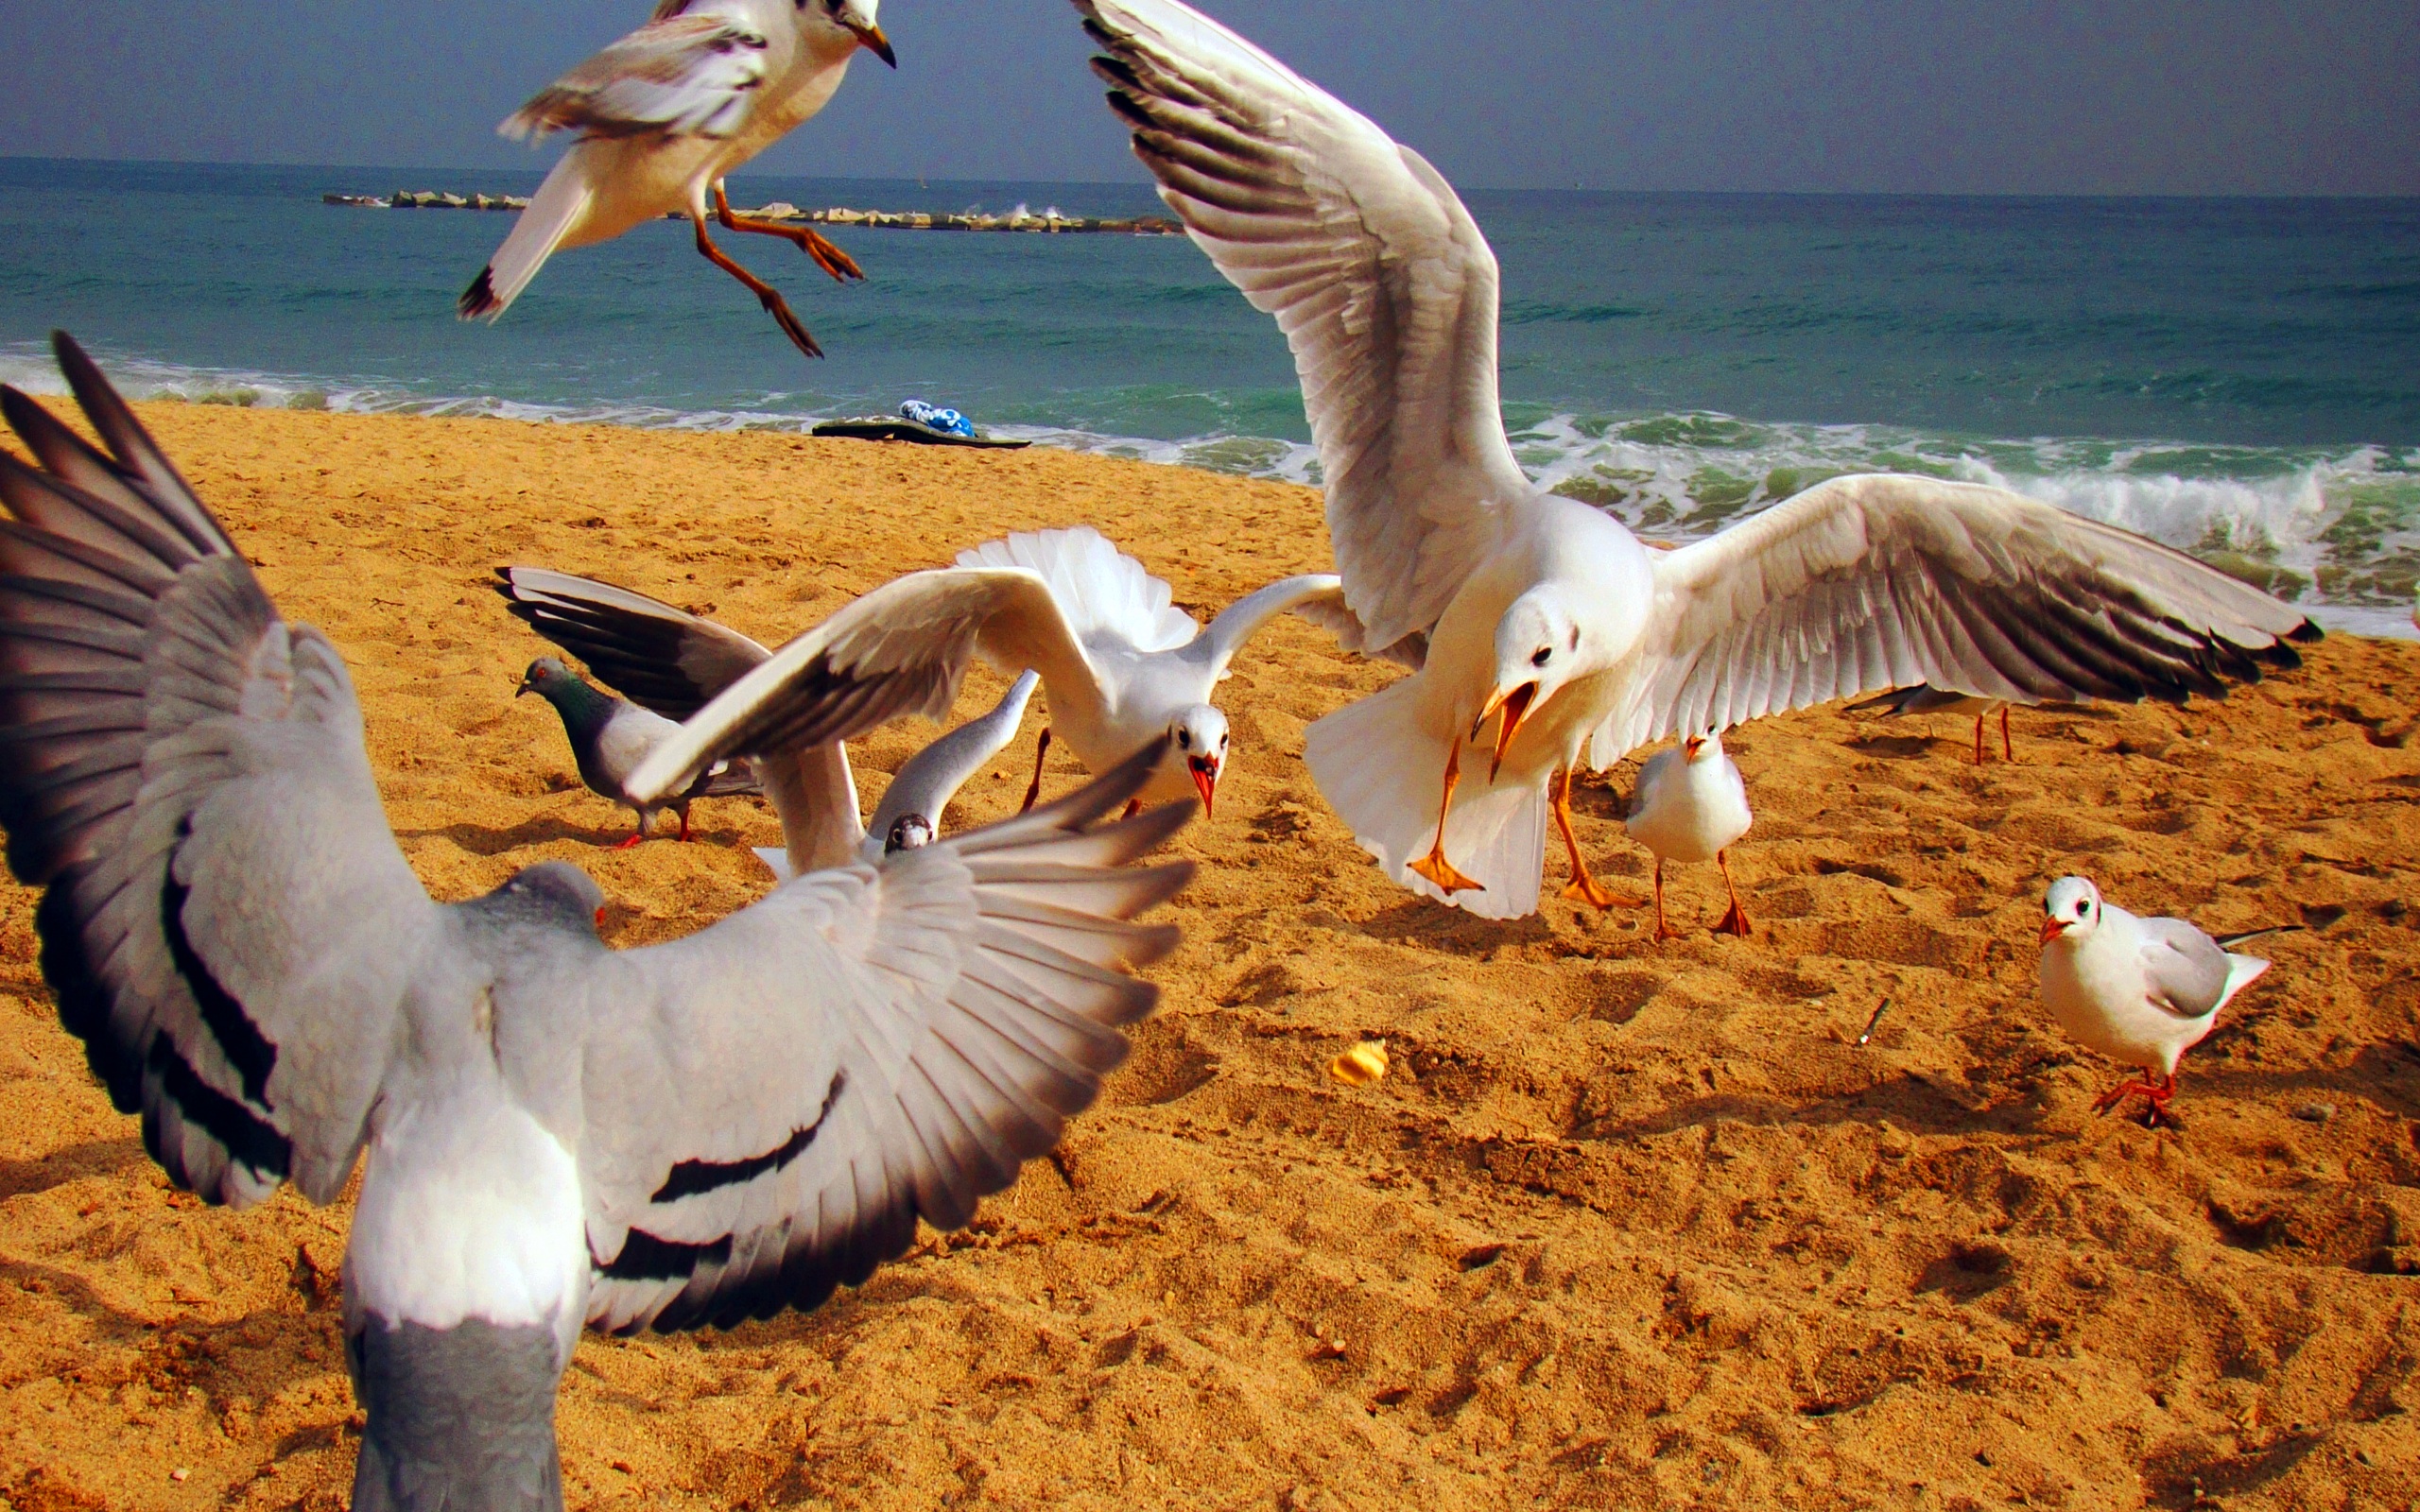 Birds flying over a sandy beach surrounded by the ocean in Spain.